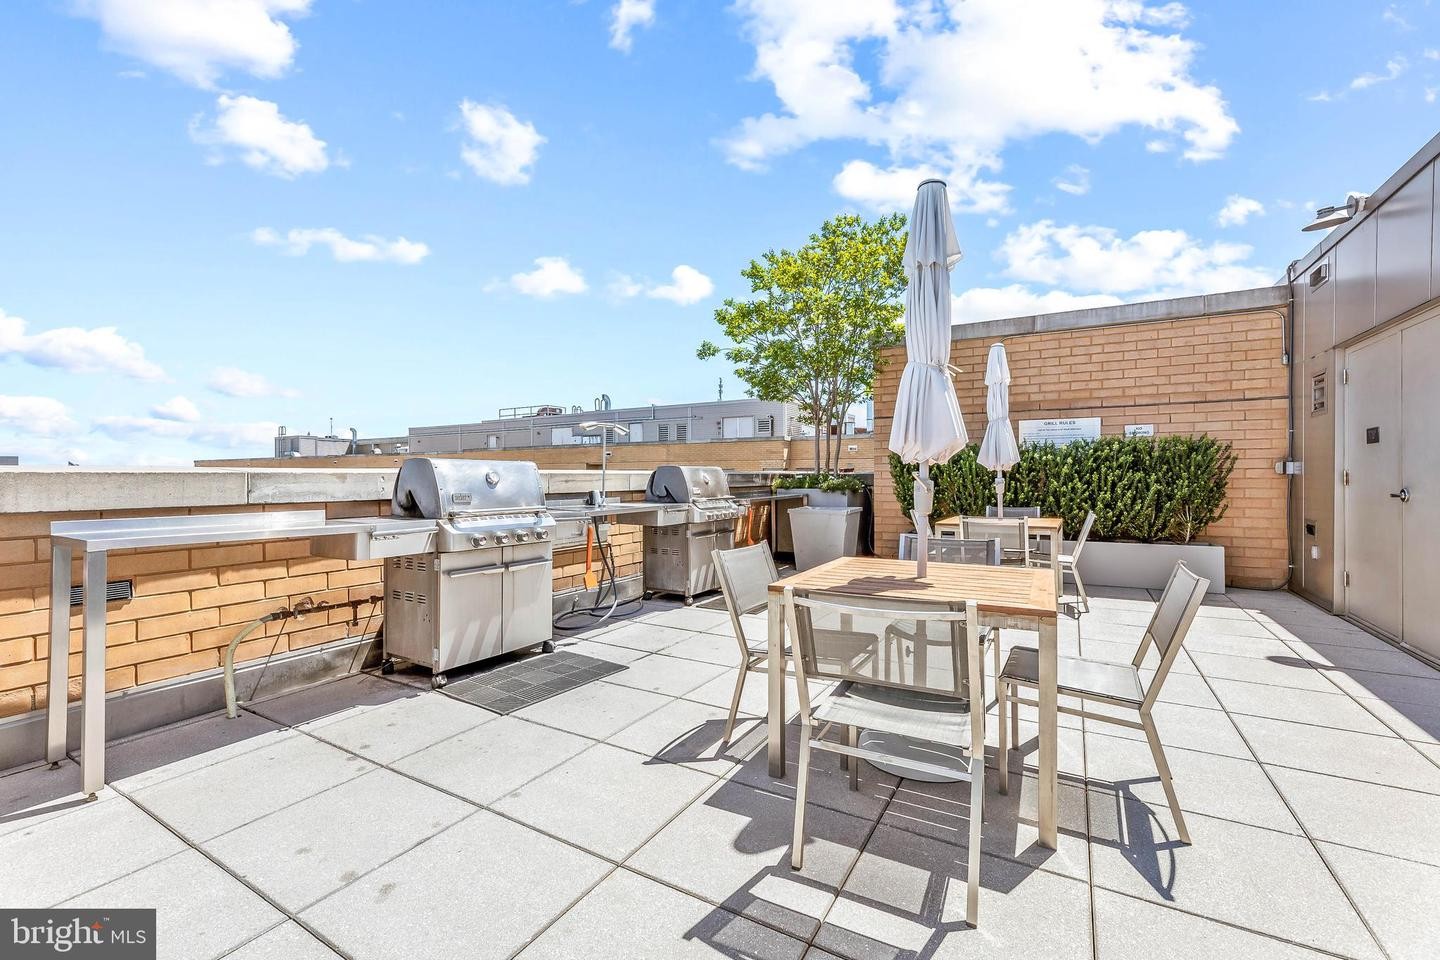 19. 475 K St NW 